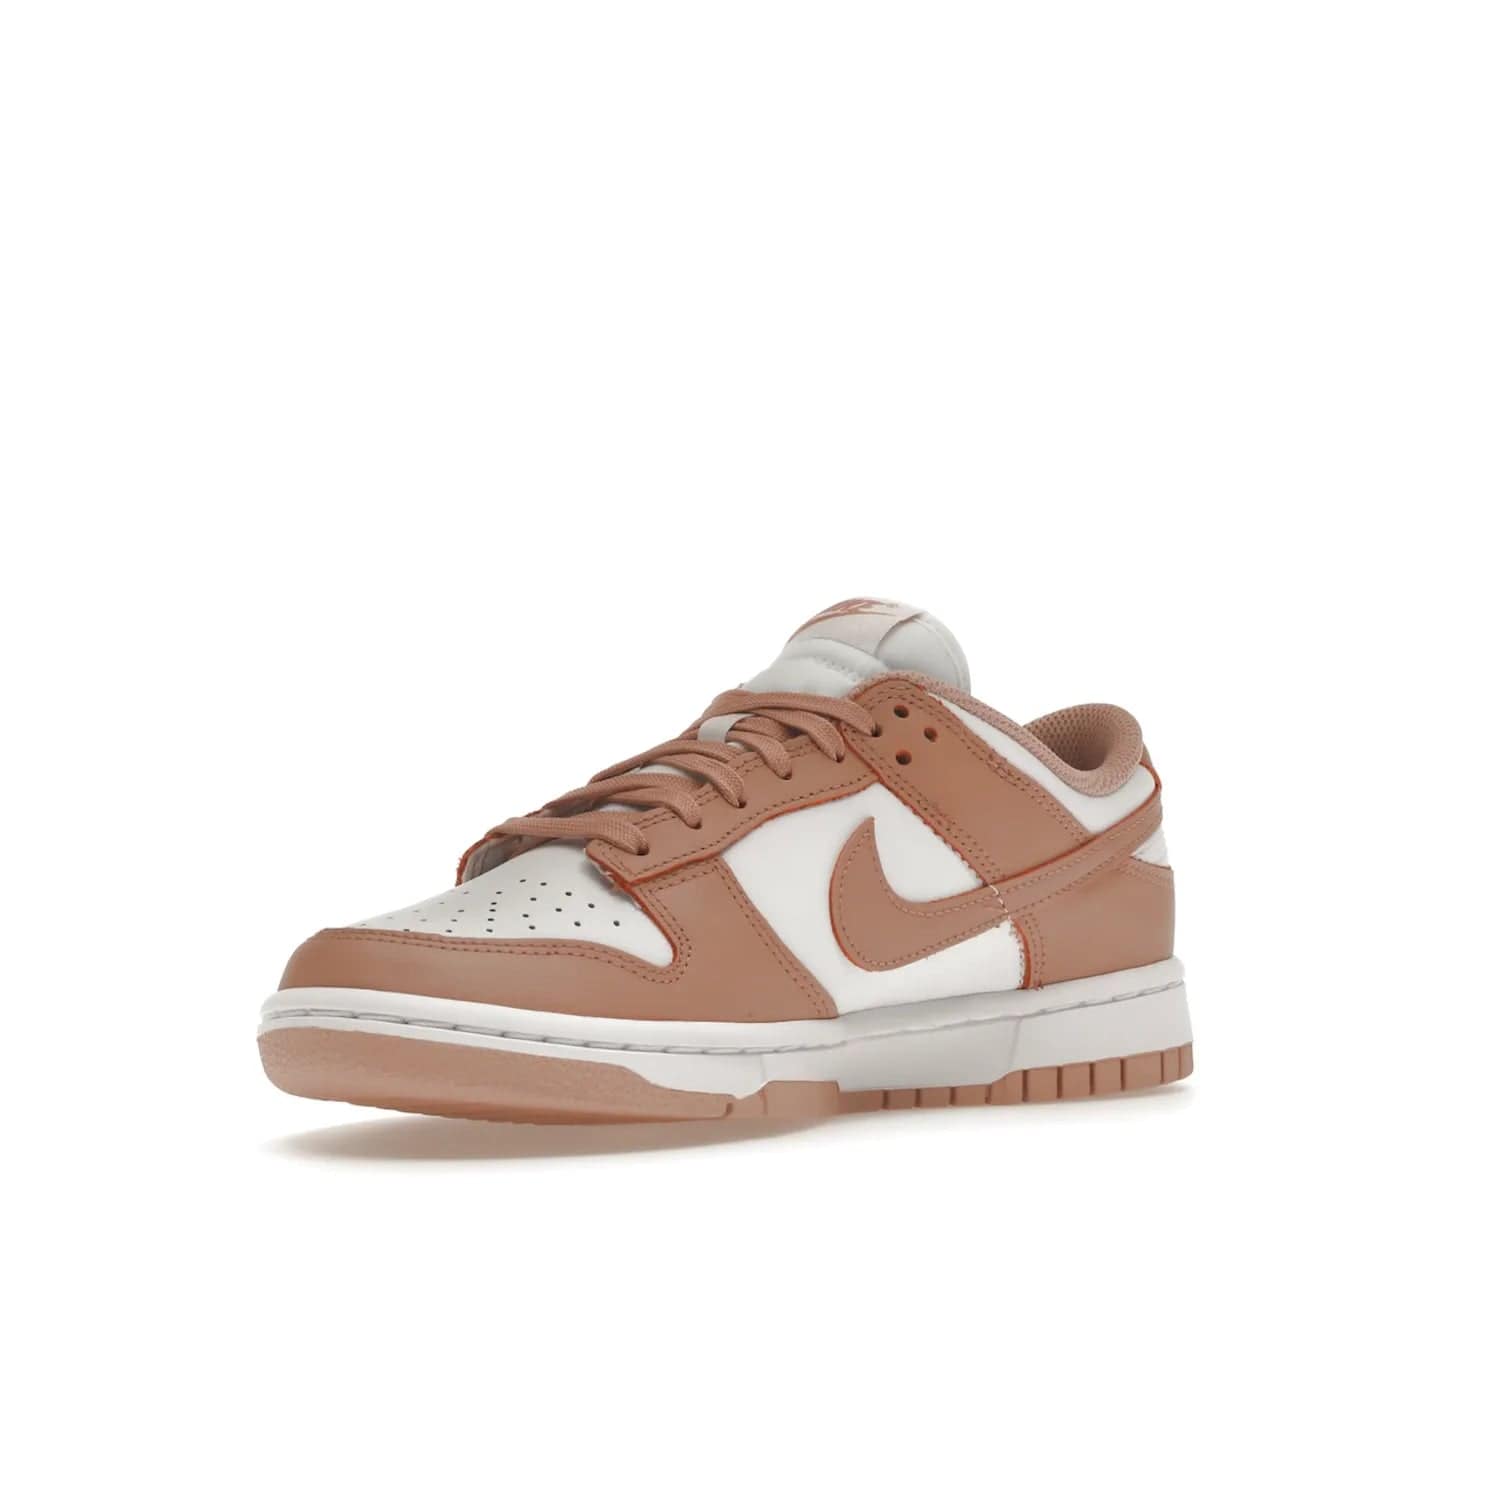 Nike Dunk Low Rose Whisper (Women's) - Image 15 - Only at www.BallersClubKickz.com - The Nike Dunk Low Rose Whisper is the perfect summer shoe with classic two-tone look and vintage-inspired design. Features white and Rose Whisper leather upper, woven tongue labels and EVA foam sole for plush cushioning. Available June 2022 at $100.